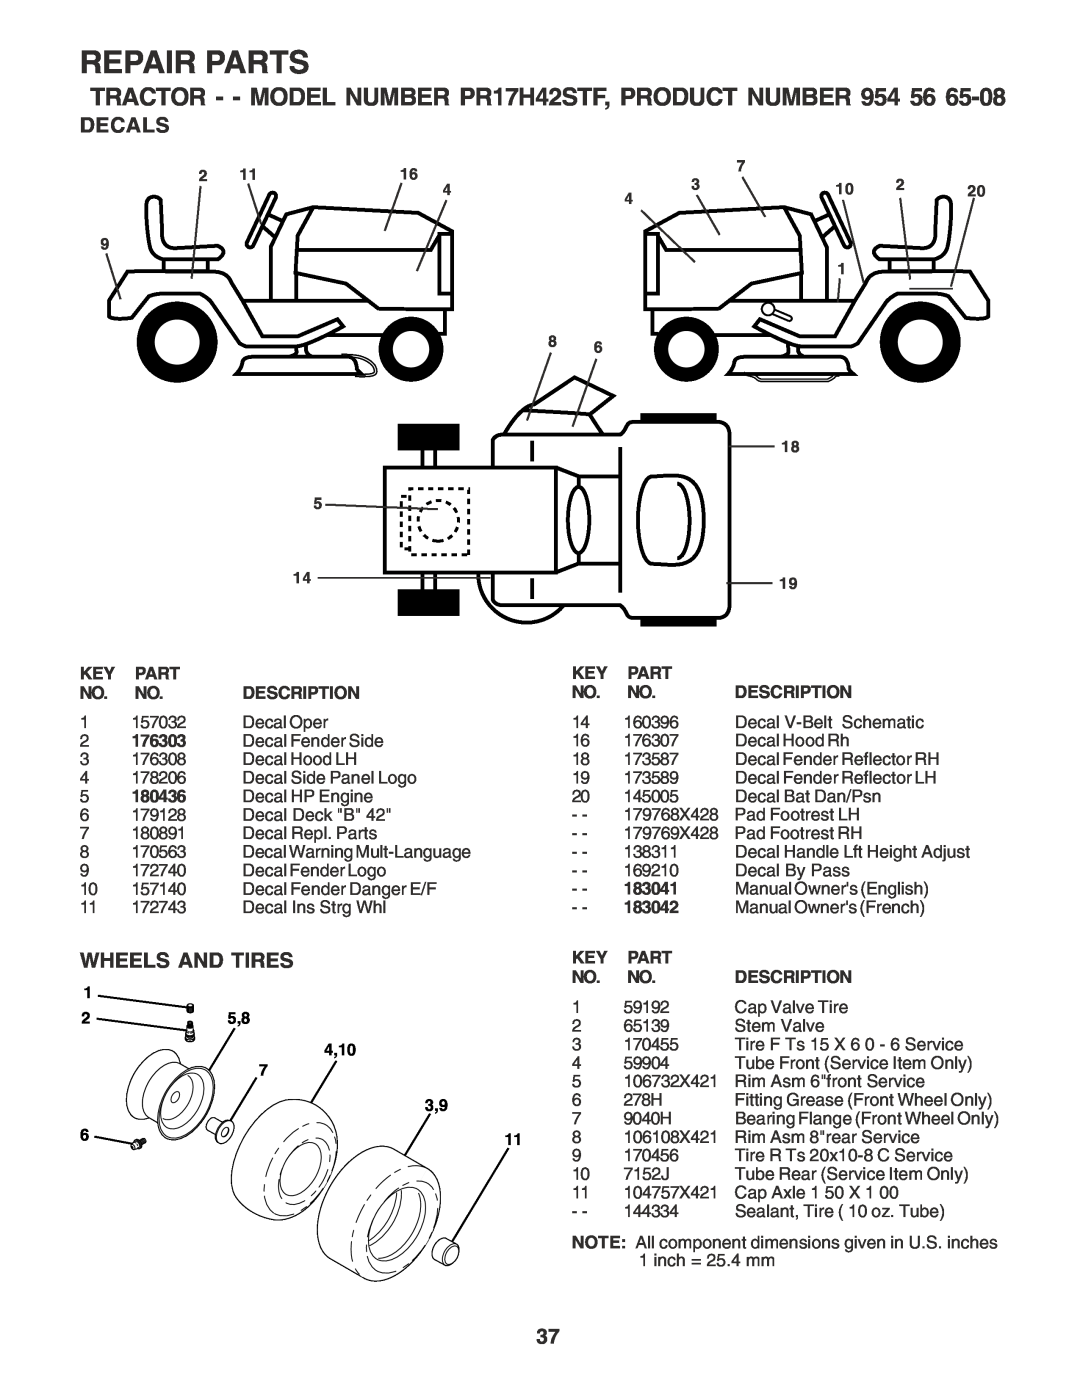 Poulan 183041 Decals, Wheels And Tires, Repair Parts, TRACTOR - - MODEL NUMBER PR17H42STF, PRODUCT NUMBER 954 56, 4,10 